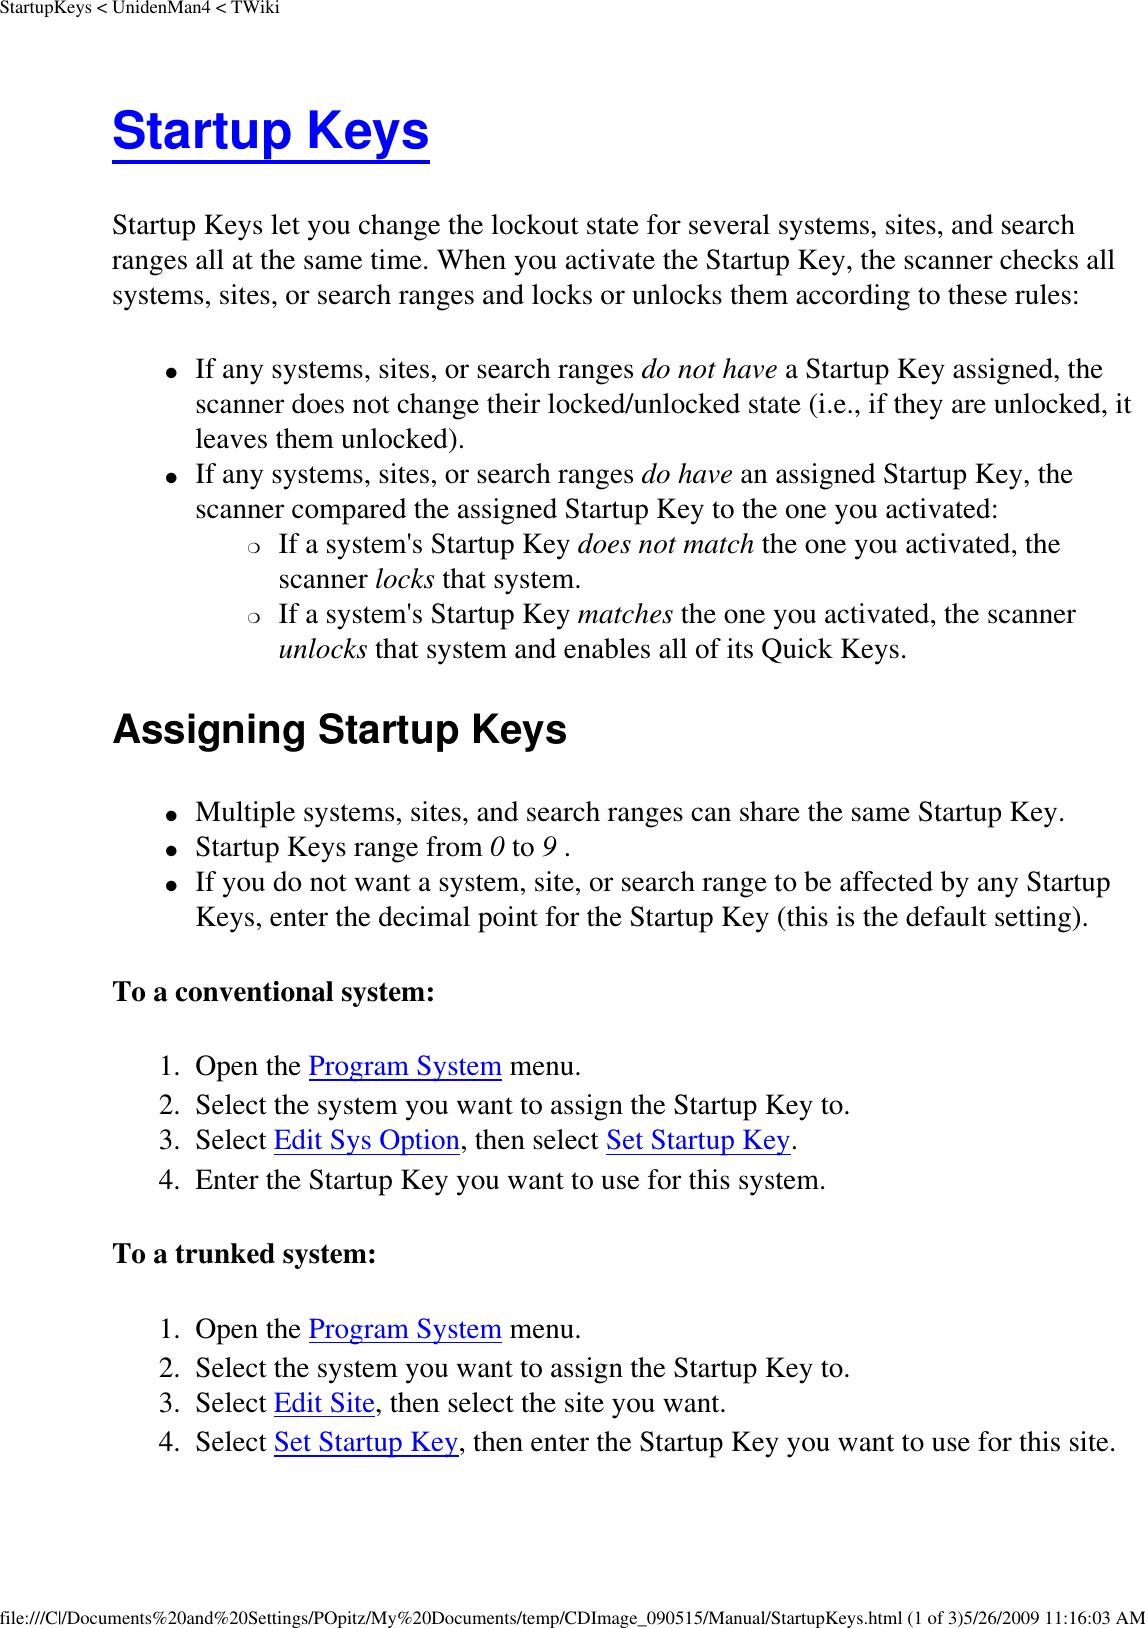 StartupKeys &lt; UnidenMan4 &lt; TWikiStartup Keys Startup Keys let you change the lockout state for several systems, sites, and search ranges all at the same time. When you activate the Startup Key, the scanner checks all systems, sites, or search ranges and locks or unlocks them according to these rules: ●     If any systems, sites, or search ranges do not have a Startup Key assigned, the scanner does not change their locked/unlocked state (i.e., if they are unlocked, it leaves them unlocked). ●     If any systems, sites, or search ranges do have an assigned Startup Key, the scanner compared the assigned Startup Key to the one you activated: ❍     If a system&apos;s Startup Key does not match the one you activated, the scanner locks that system. ❍     If a system&apos;s Startup Key matches the one you activated, the scanner unlocks that system and enables all of its Quick Keys. Assigning Startup Keys ●     Multiple systems, sites, and search ranges can share the same Startup Key. ●     Startup Keys range from 0 to 9 . ●     If you do not want a system, site, or search range to be affected by any Startup Keys, enter the decimal point for the Startup Key (this is the default setting). To a conventional system: 1.  Open the Program System menu. 2.  Select the system you want to assign the Startup Key to. 3.  Select Edit Sys Option, then select Set Startup Key. 4.  Enter the Startup Key you want to use for this system. To a trunked system: 1.  Open the Program System menu. 2.  Select the system you want to assign the Startup Key to. 3.  Select Edit Site, then select the site you want. 4.  Select Set Startup Key, then enter the Startup Key you want to use for this site. file:///C|/Documents%20and%20Settings/POpitz/My%20Documents/temp/CDImage_090515/Manual/StartupKeys.html (1 of 3)5/26/2009 11:16:03 AM